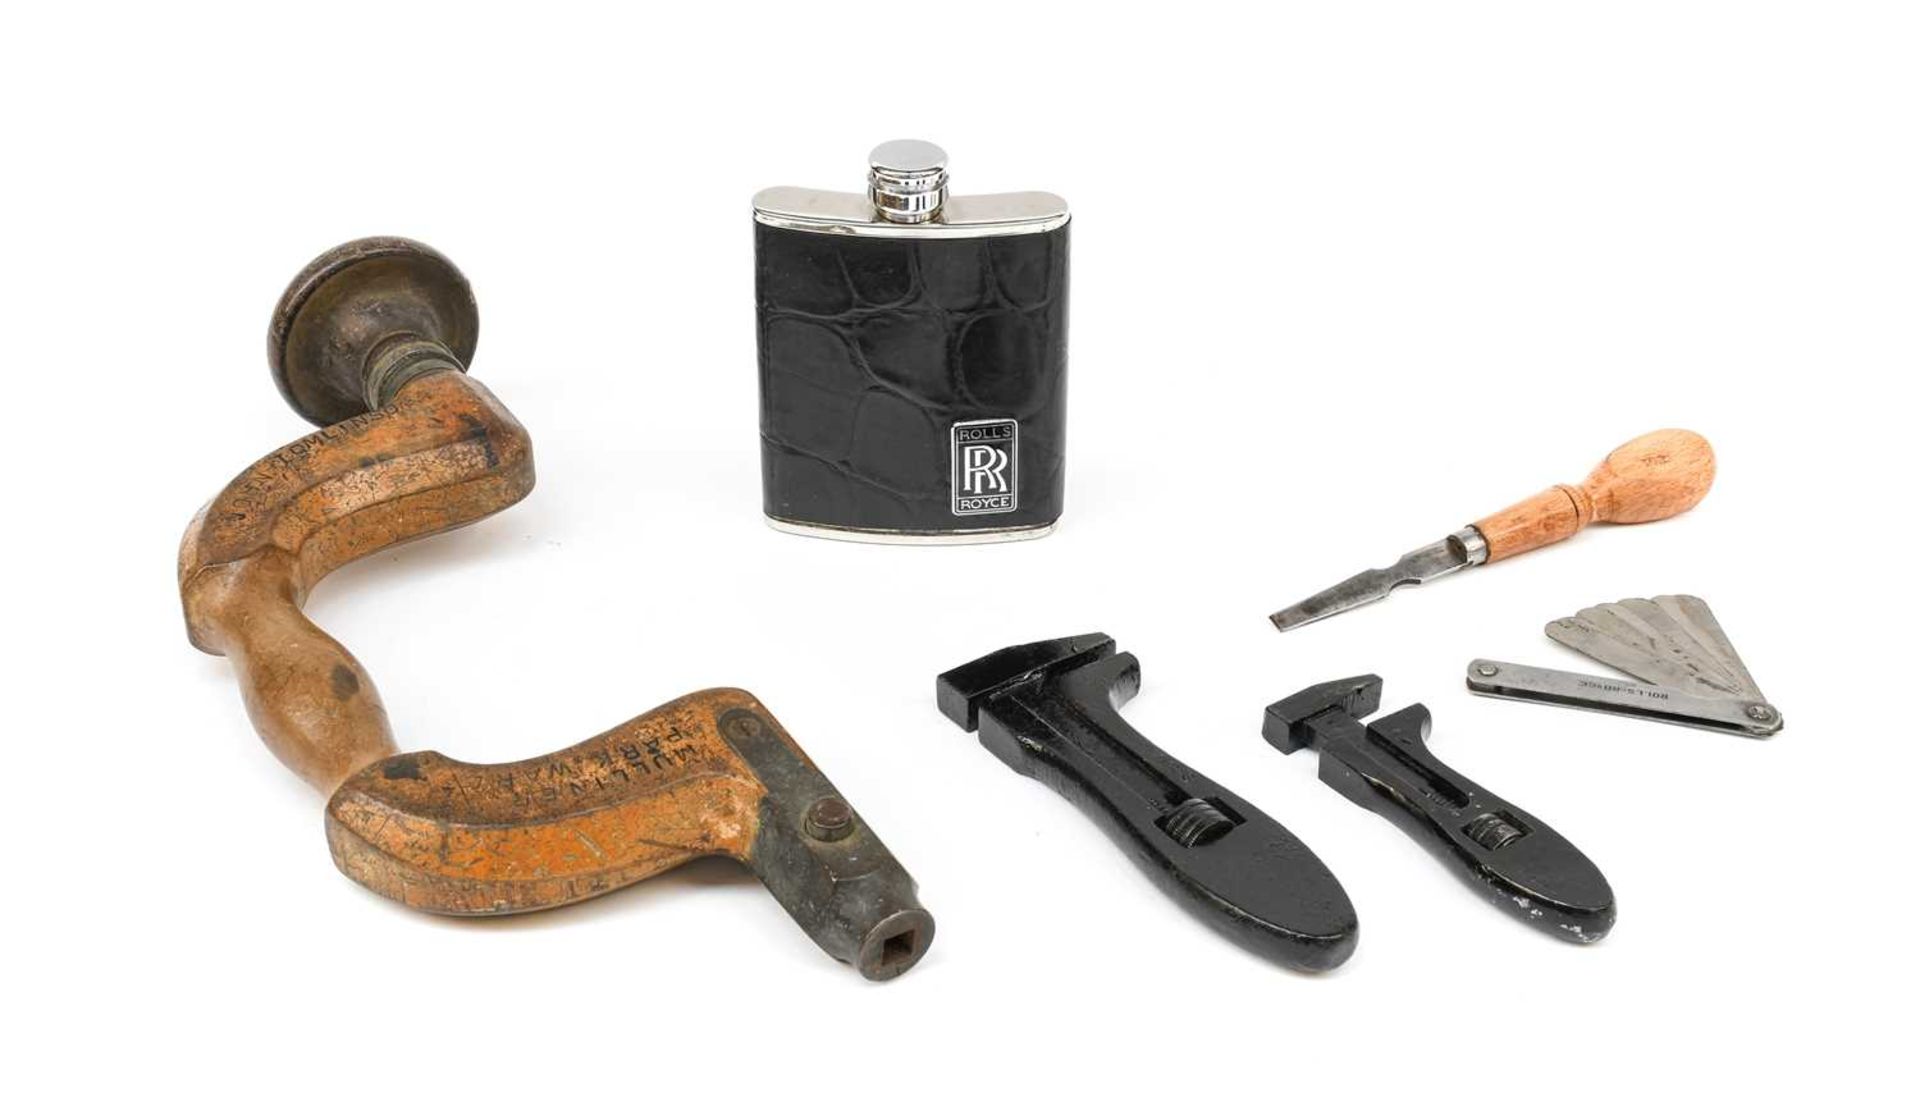 Automobilia, to include: Mulliner Park Ward Limited: a wooden and brass builder's hand brace, a pair